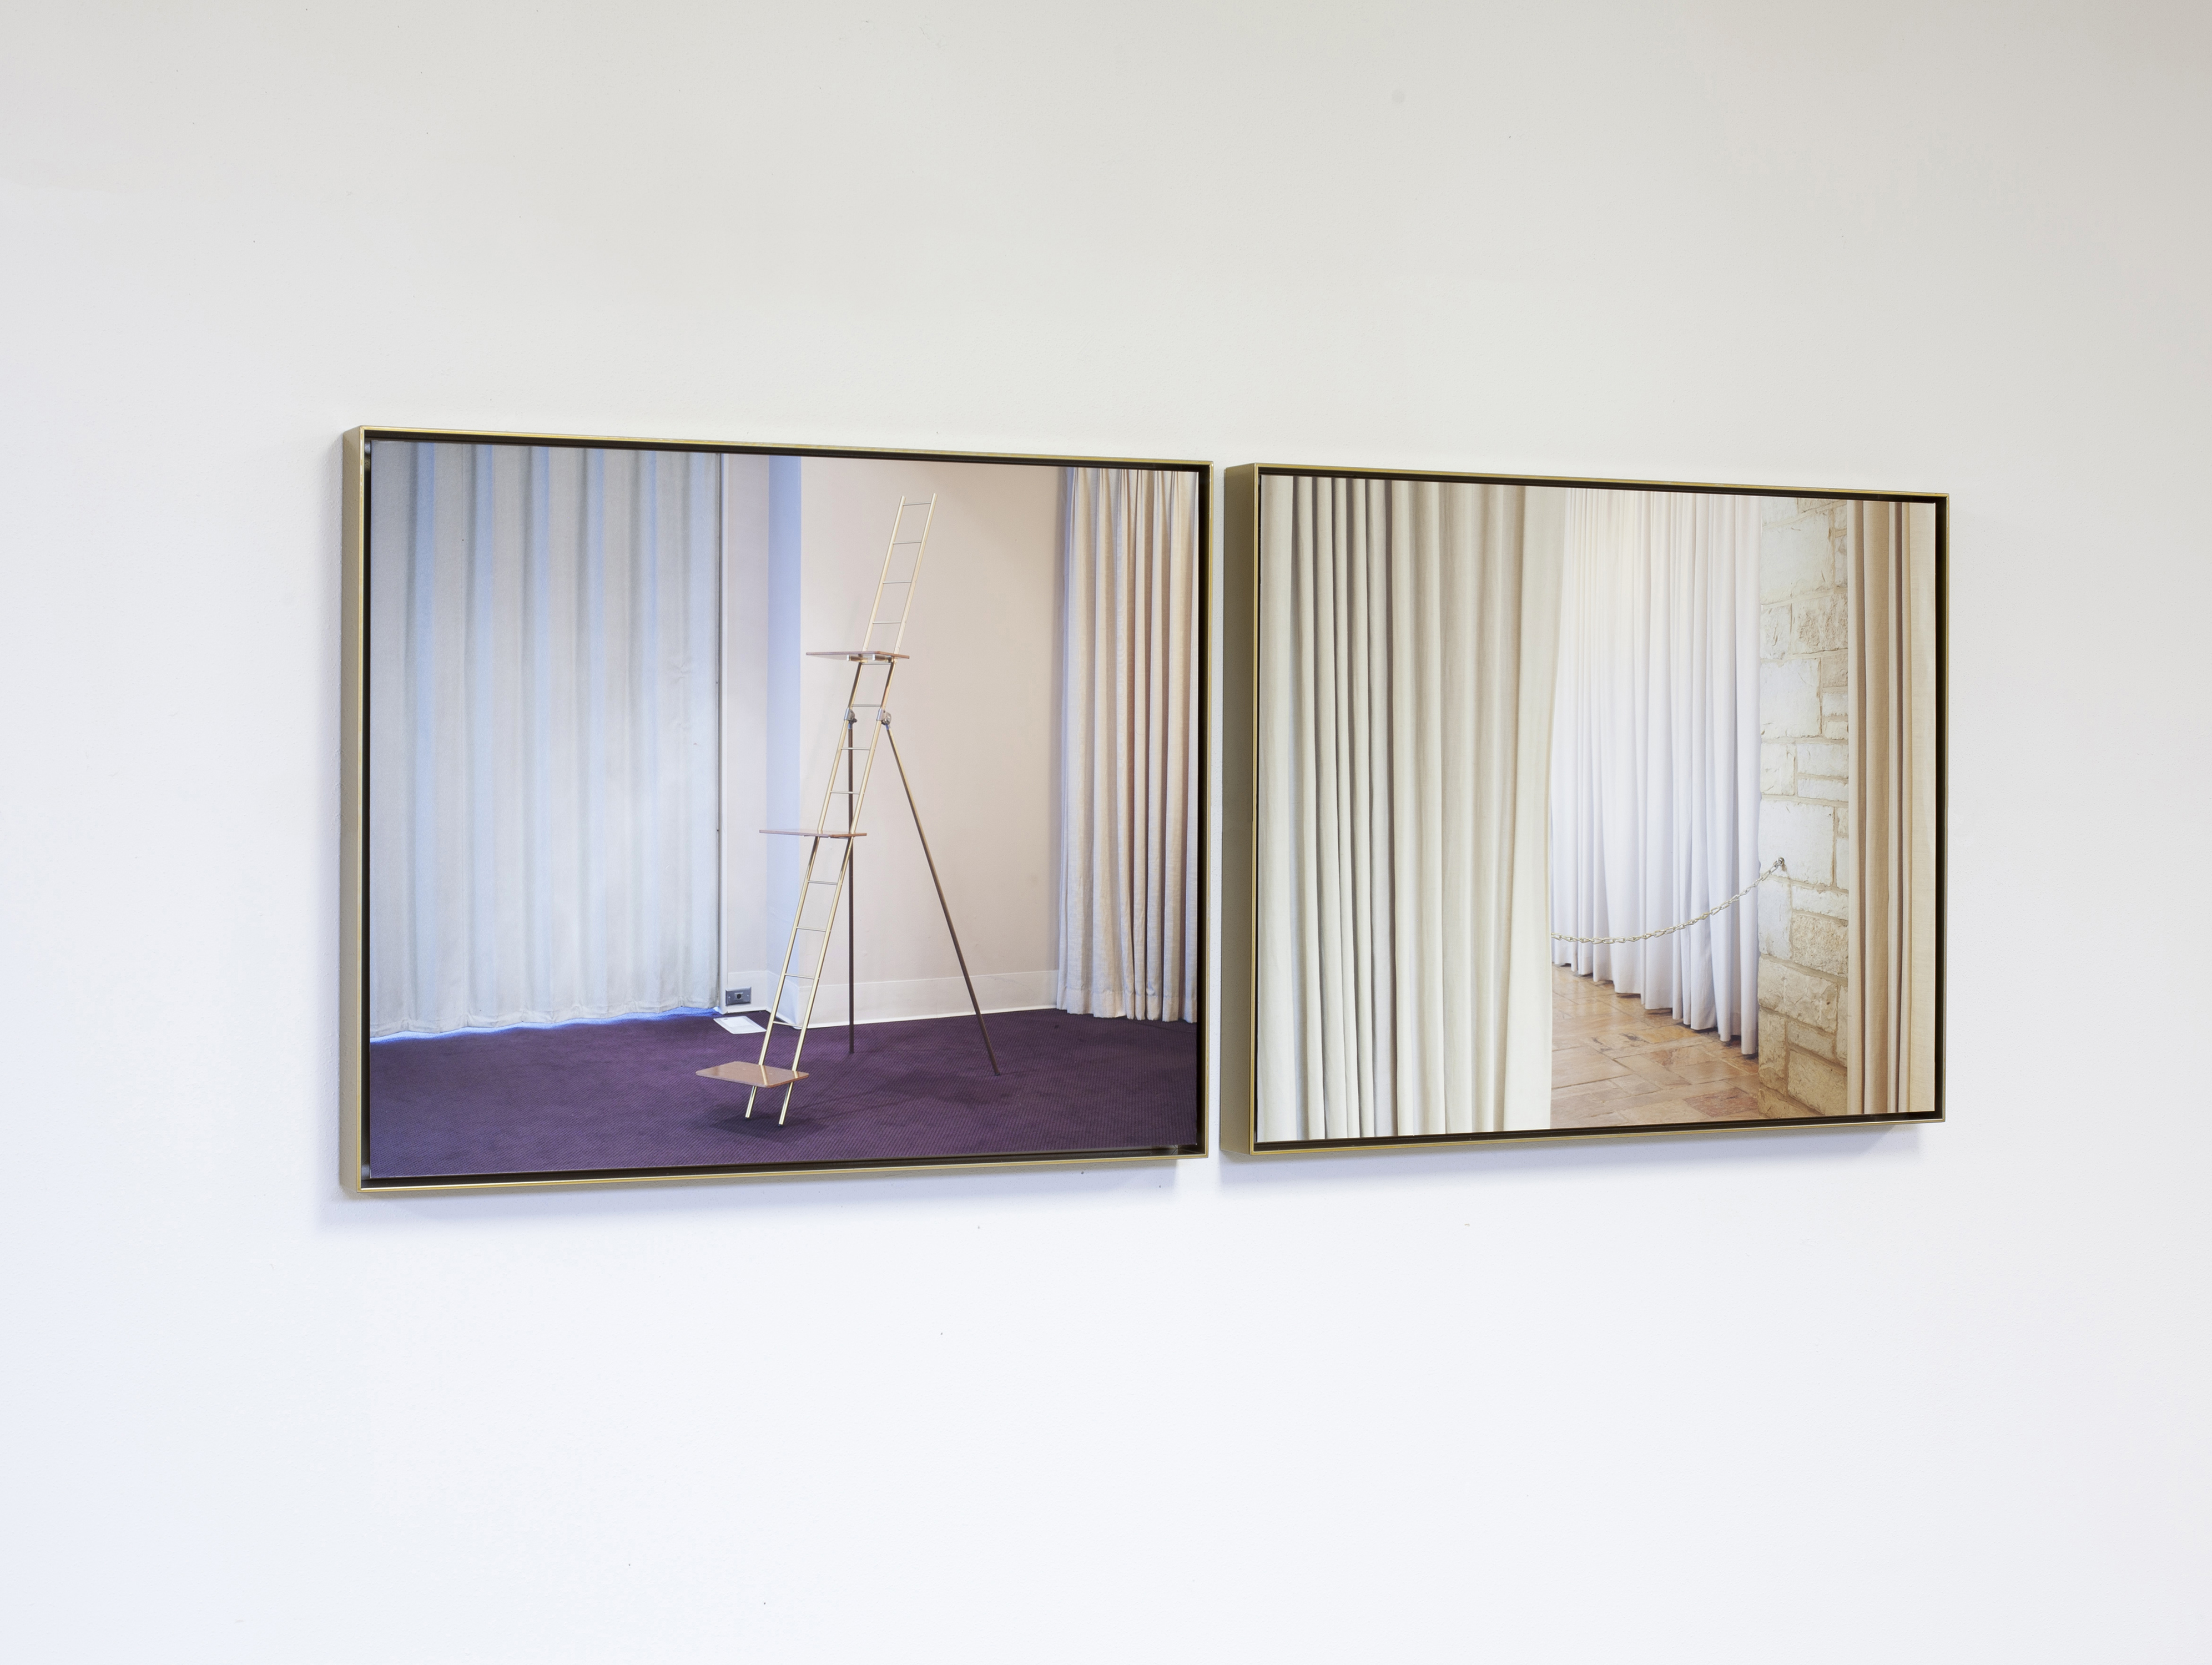 Rachel Cox, Installation, 2019, archival pigment prints mounted to dibond with UV satin laminate, float framed in powder coated brass, 20" x 24"